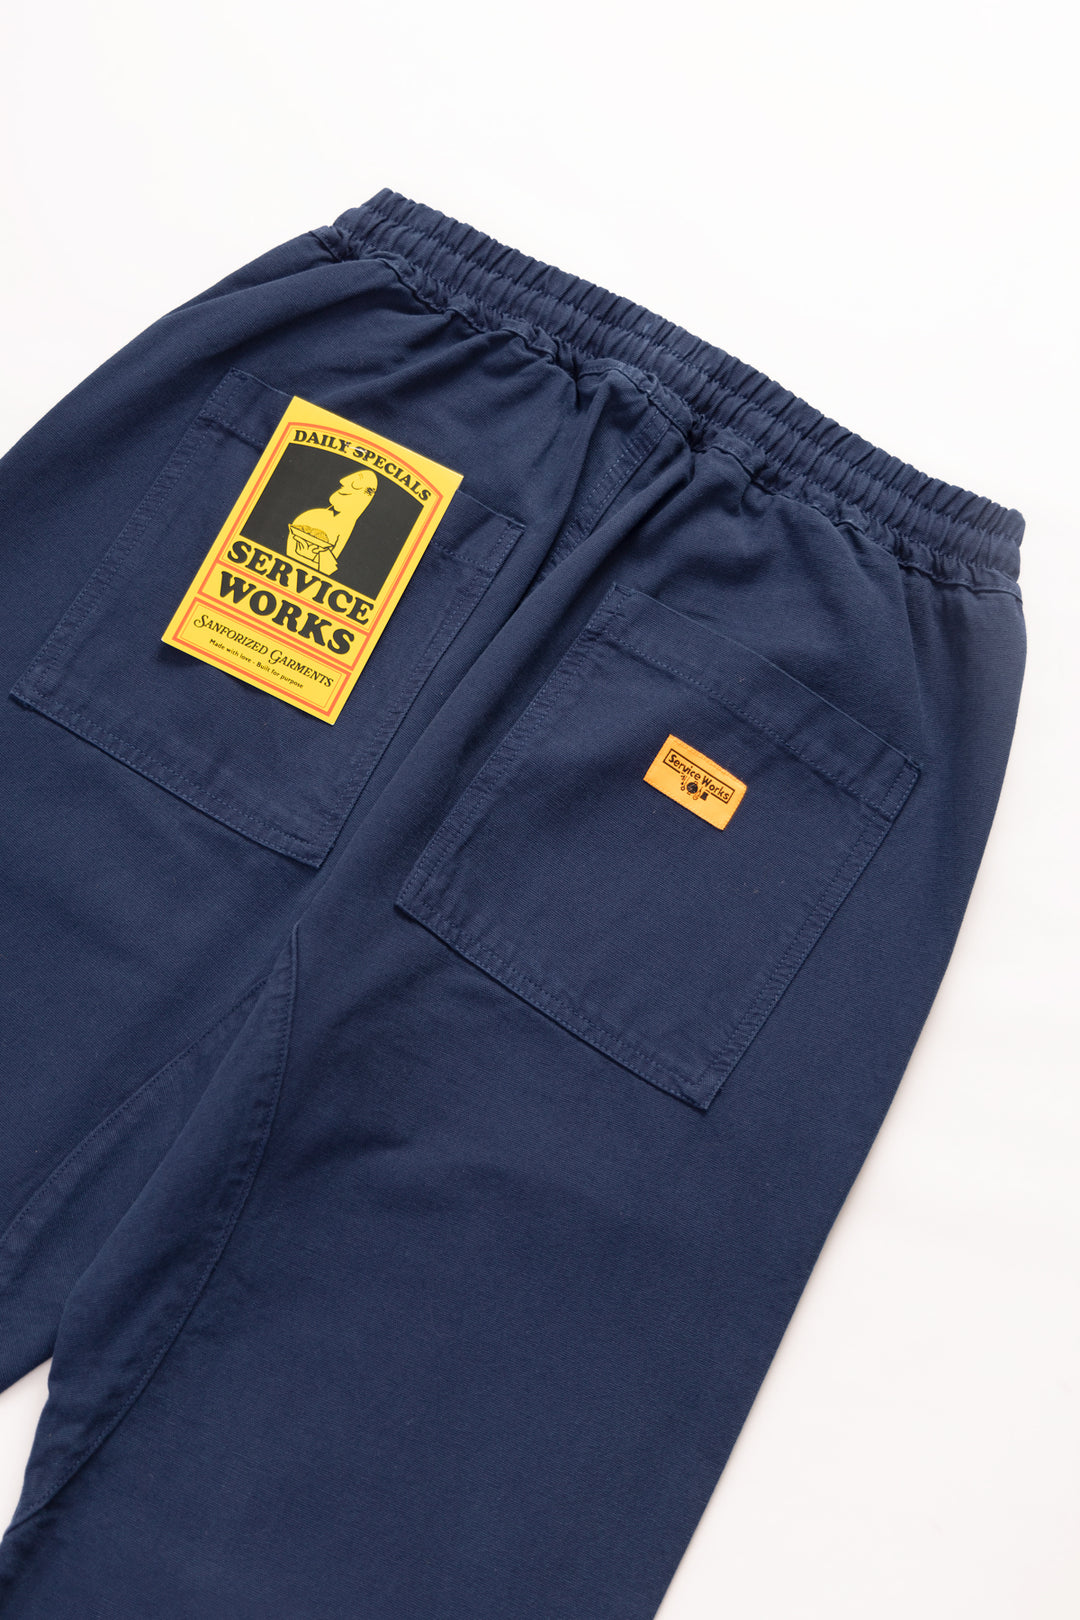 Service Works - Classic Chef Pants - Navy